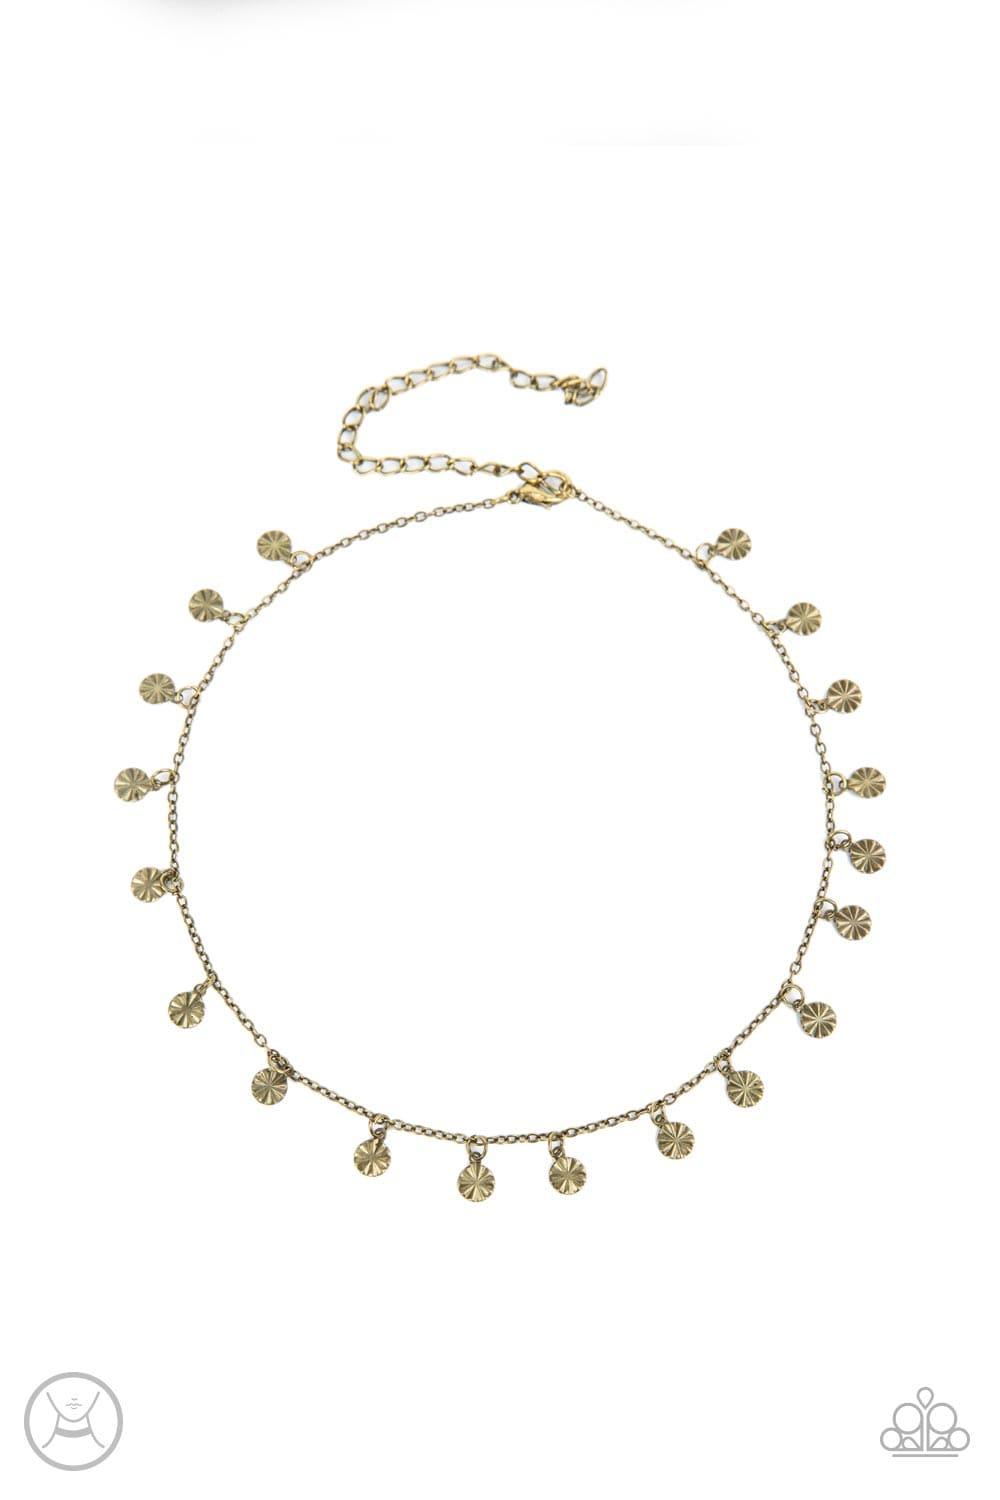 Paparazzi Accessories - Chiming Charmer - Brass Choker Necklace - Bling by JessieK